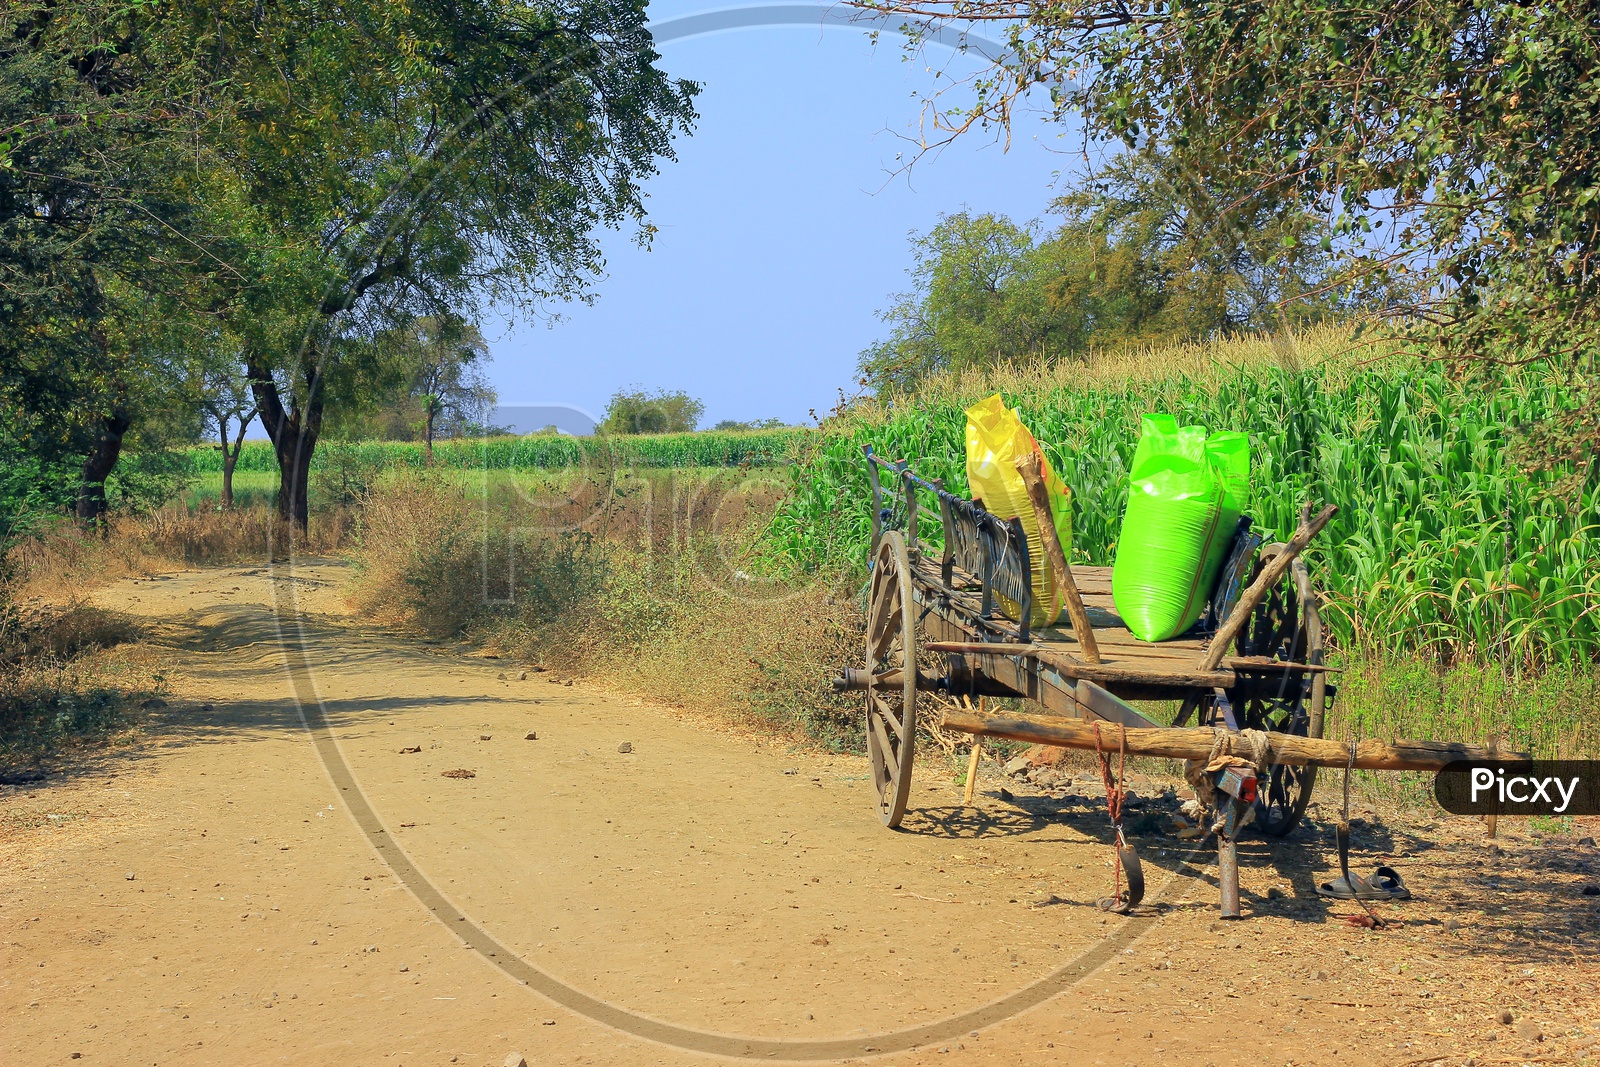 A Corn Field With Cart along Side